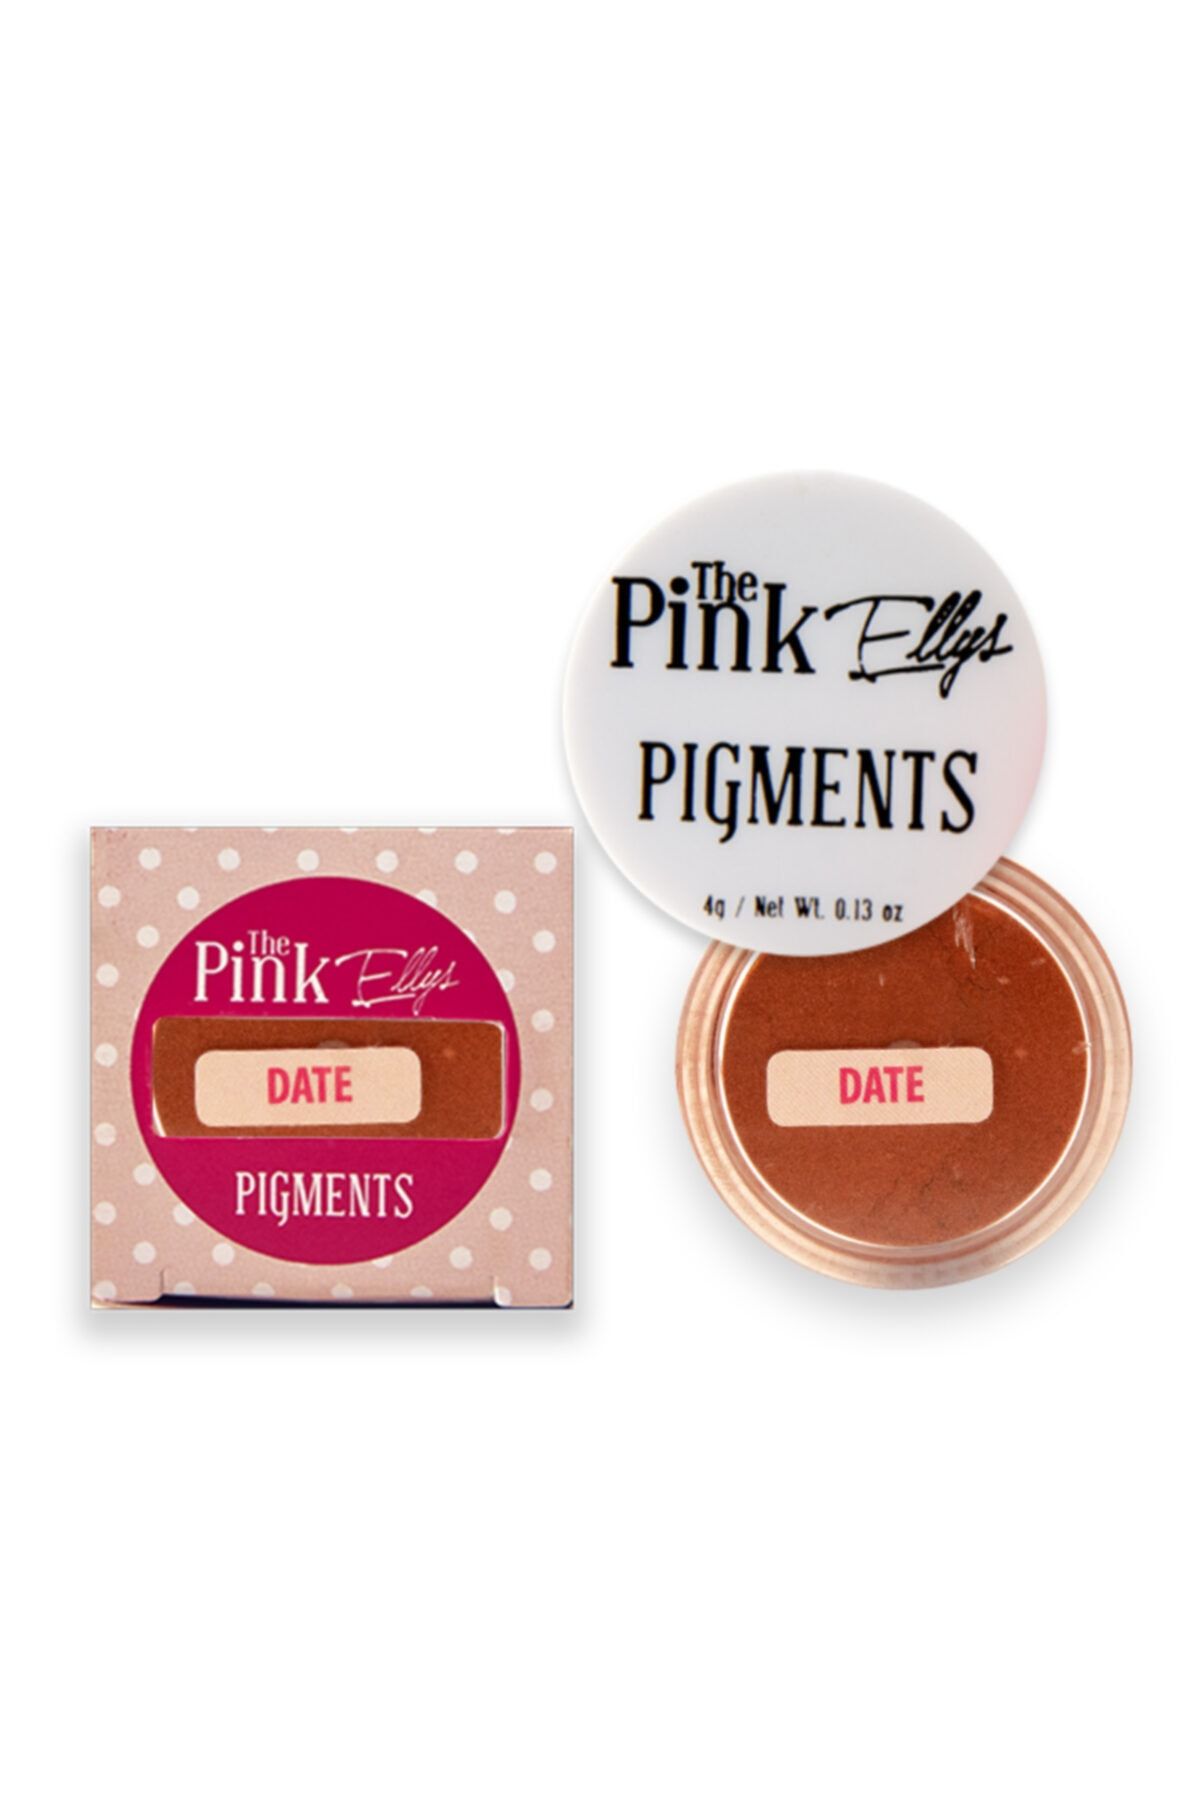 The Pink Ellys Pigments Date